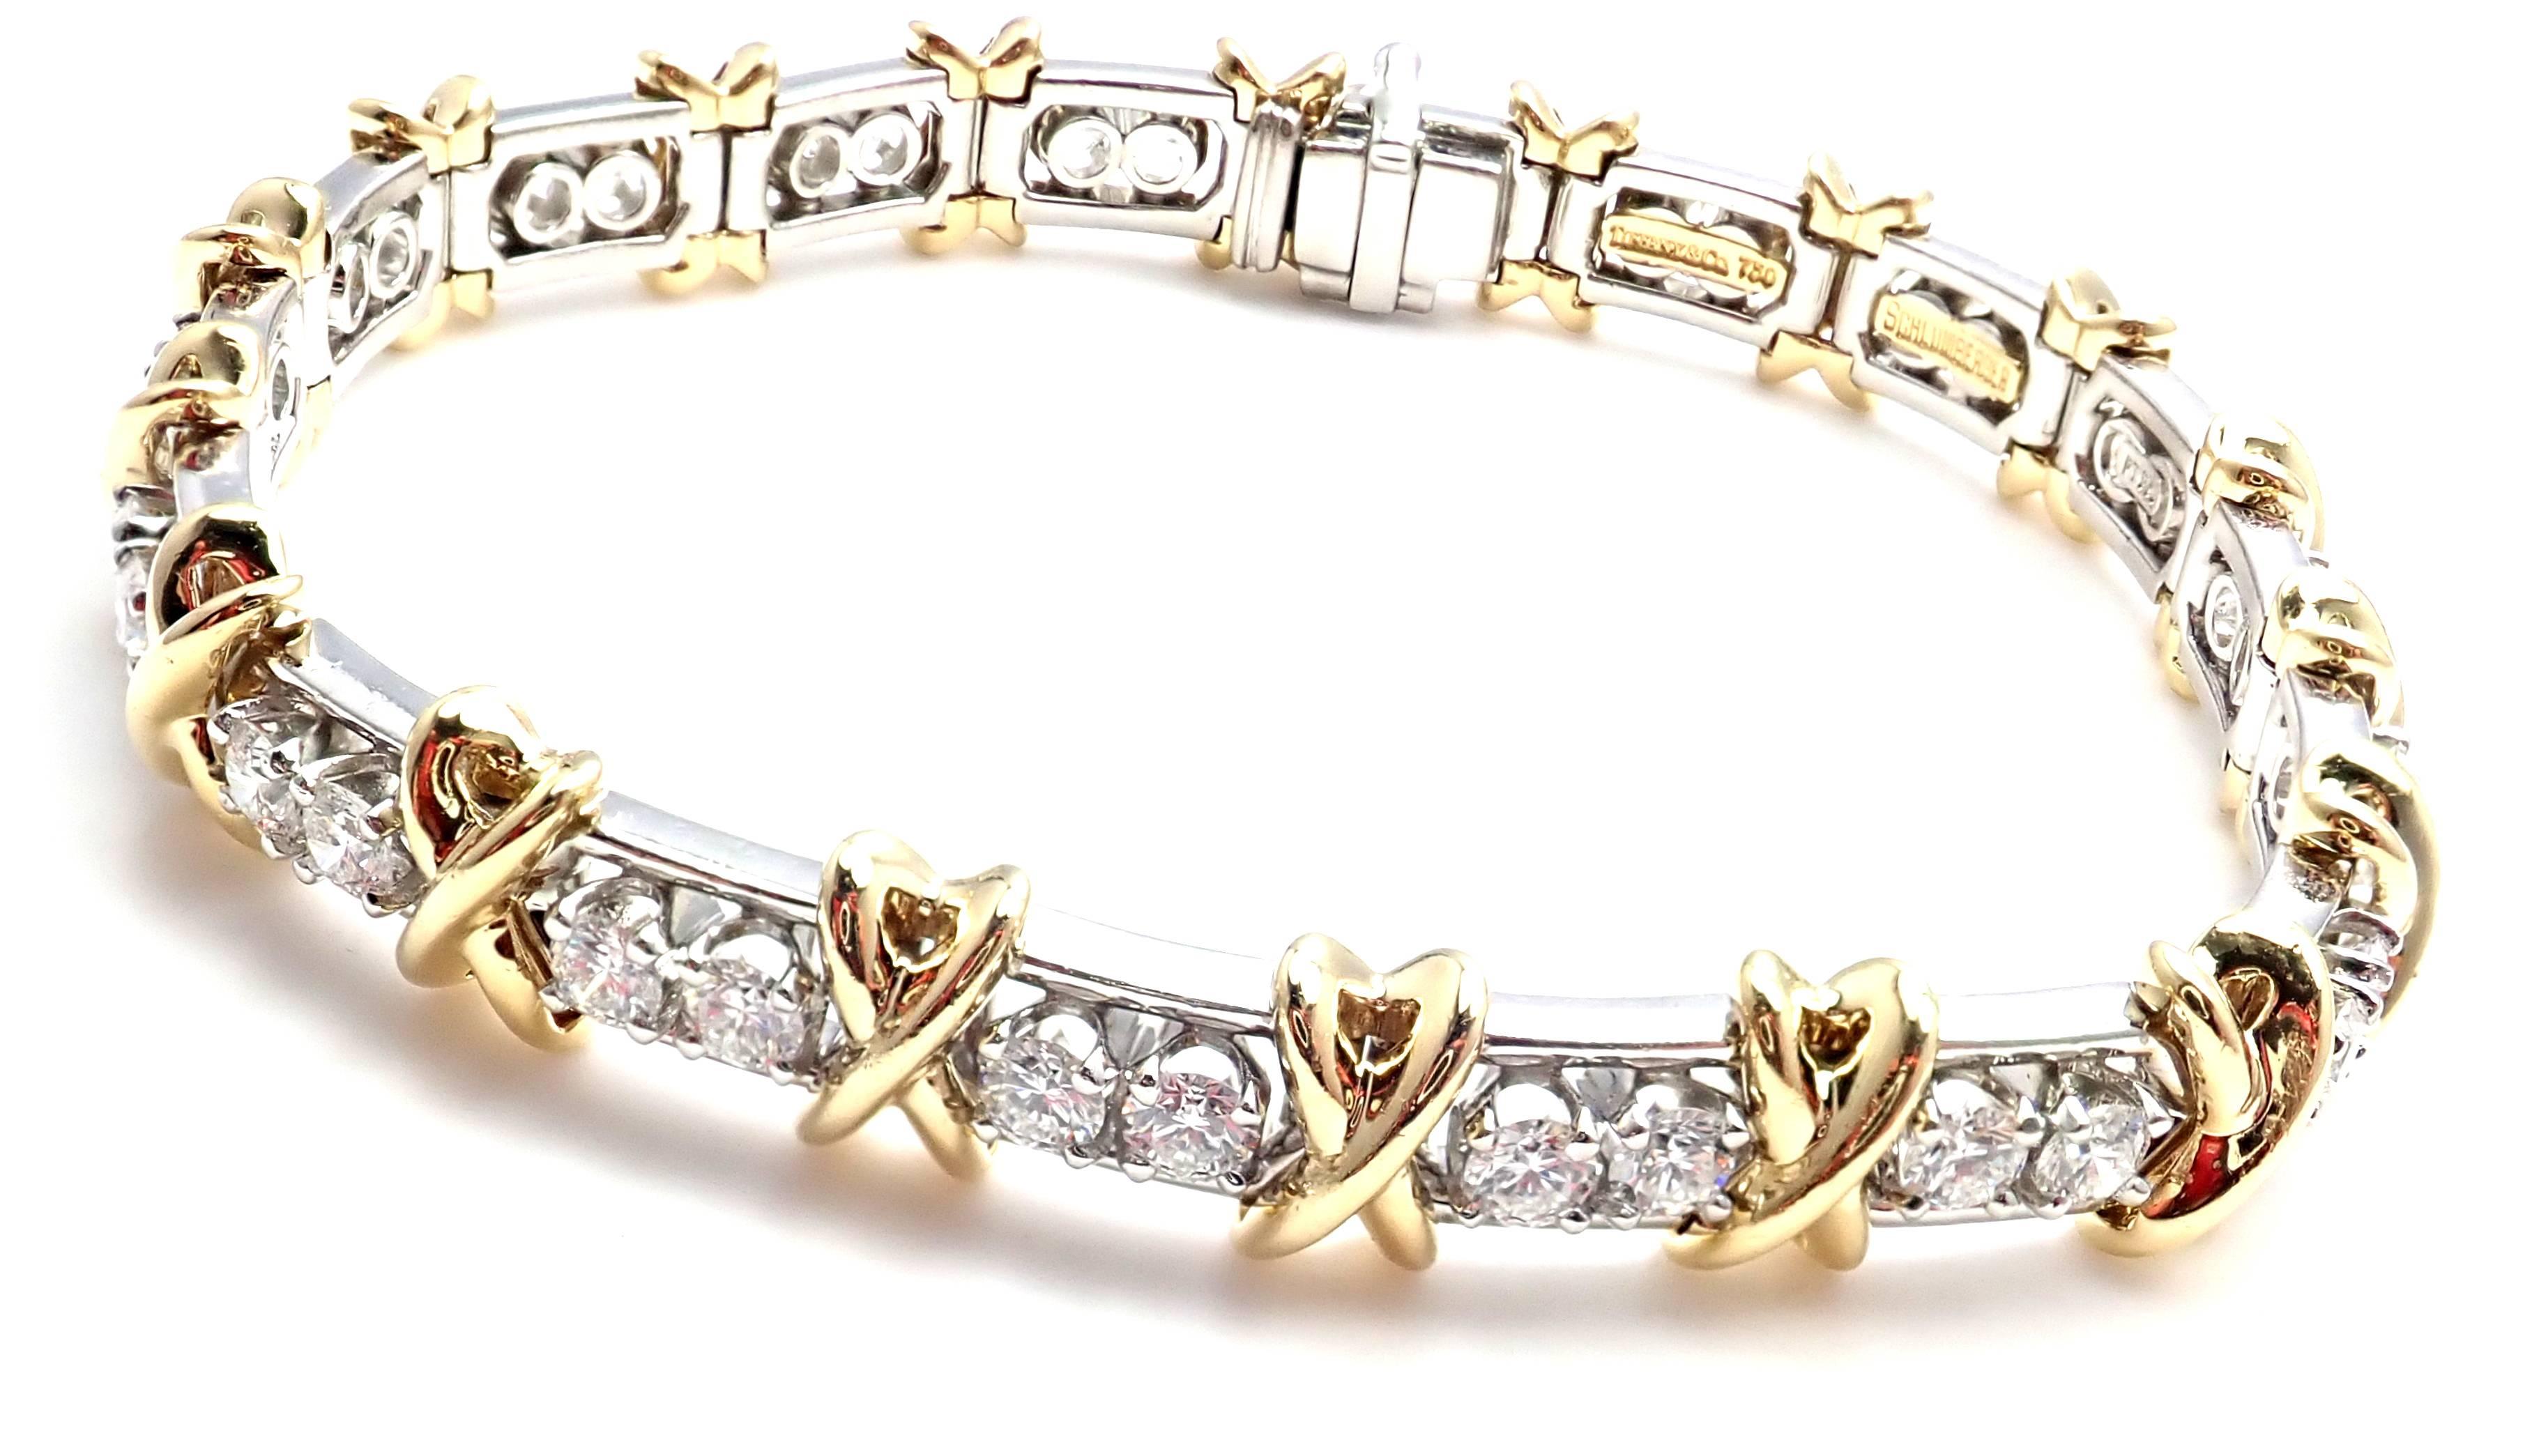 18k Yellow Gold & Platinum 36-Stone Diamond Bracelet by Jean Schlumberger for Tiffany & Co. 
With 36 ground brilliant cut diamonds VS1 clarity, G color total weight approx. 2.95ct
Details: 
Weight: 35 grams
Length: 7